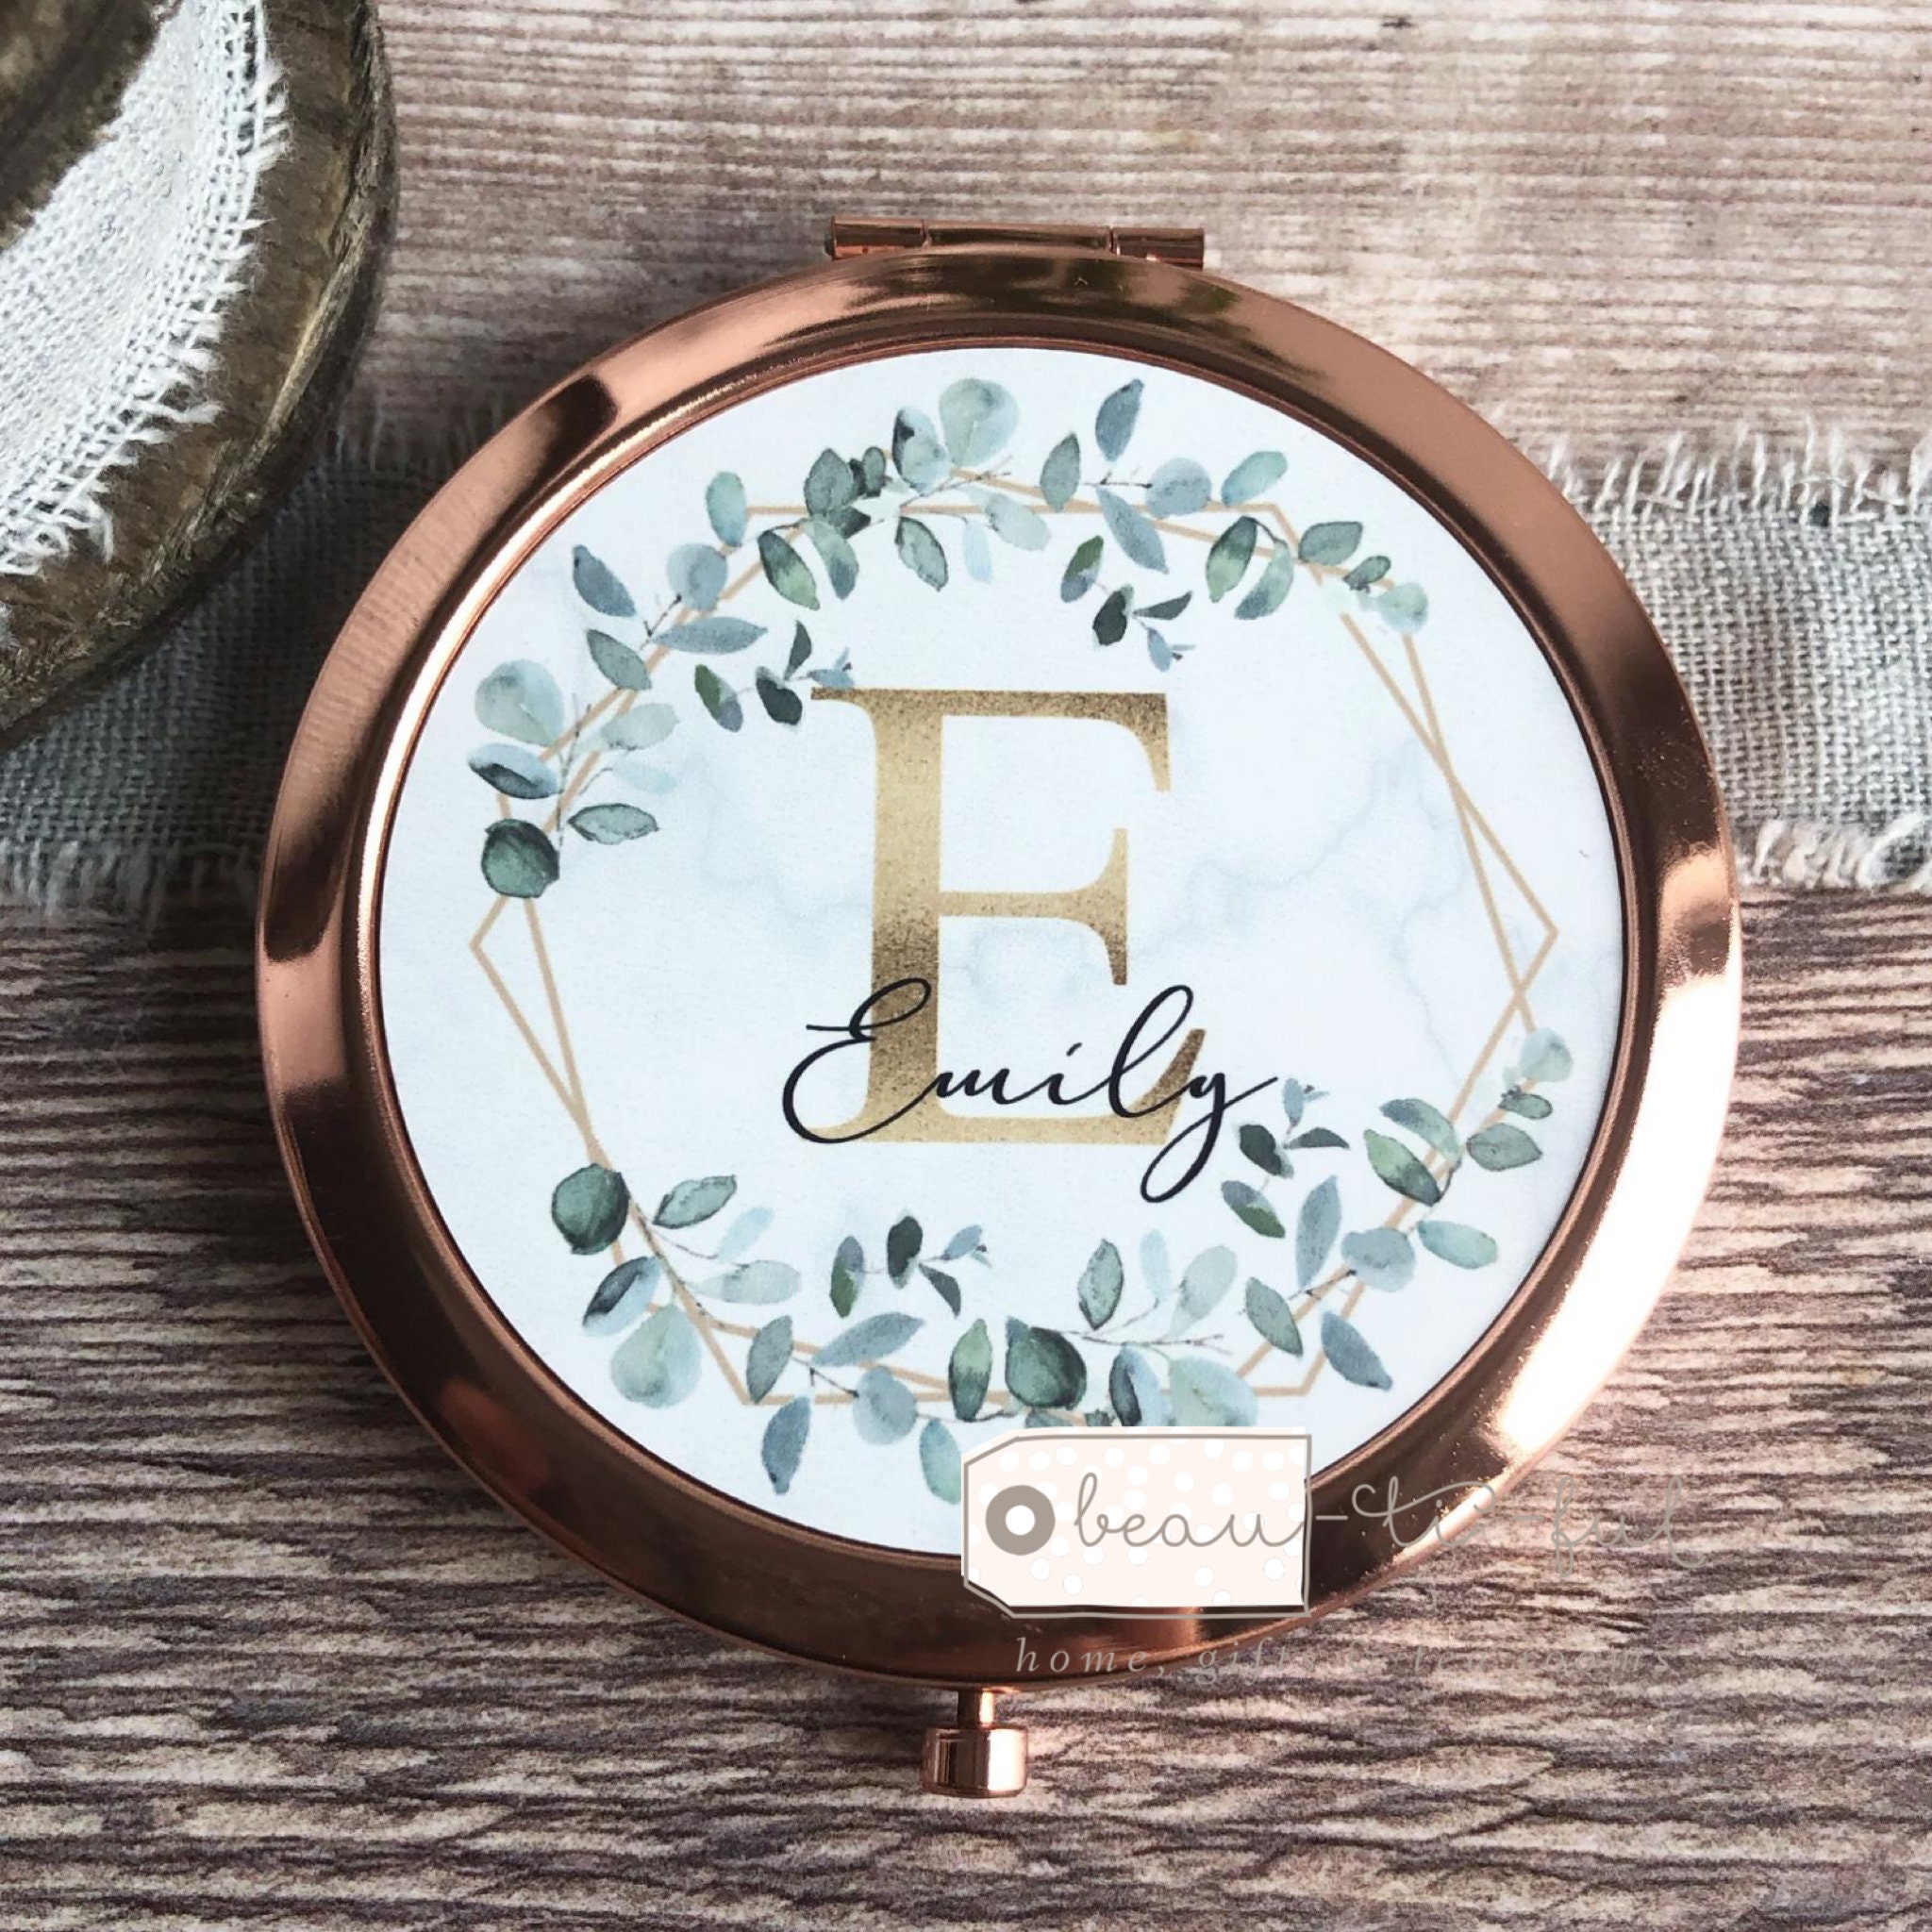  WEDDINGSTAR Custom Engraved Faux Leather Personalized Compact  Mirror, Gold - Initial Monogram : Beauty & Personal Care